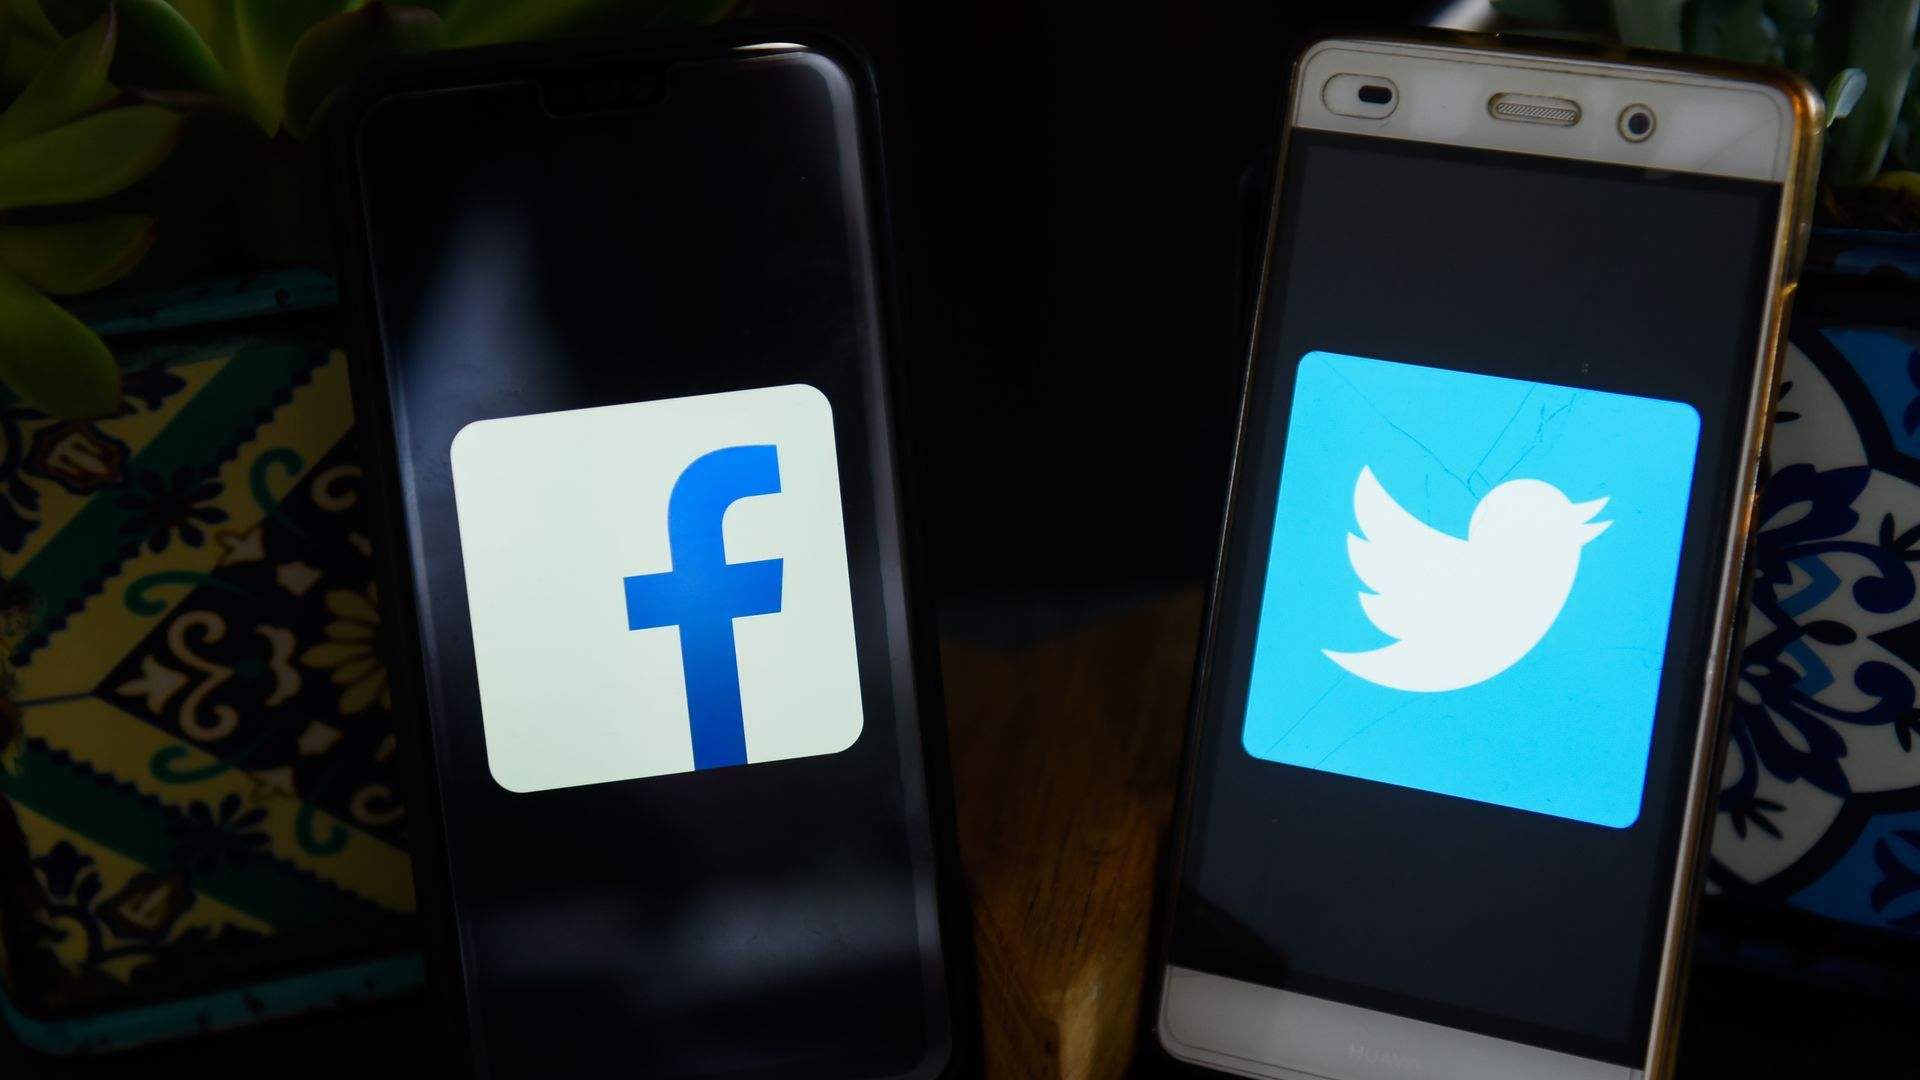 Two smartphones show the logos for Facebook and Twitter on their respective screens.